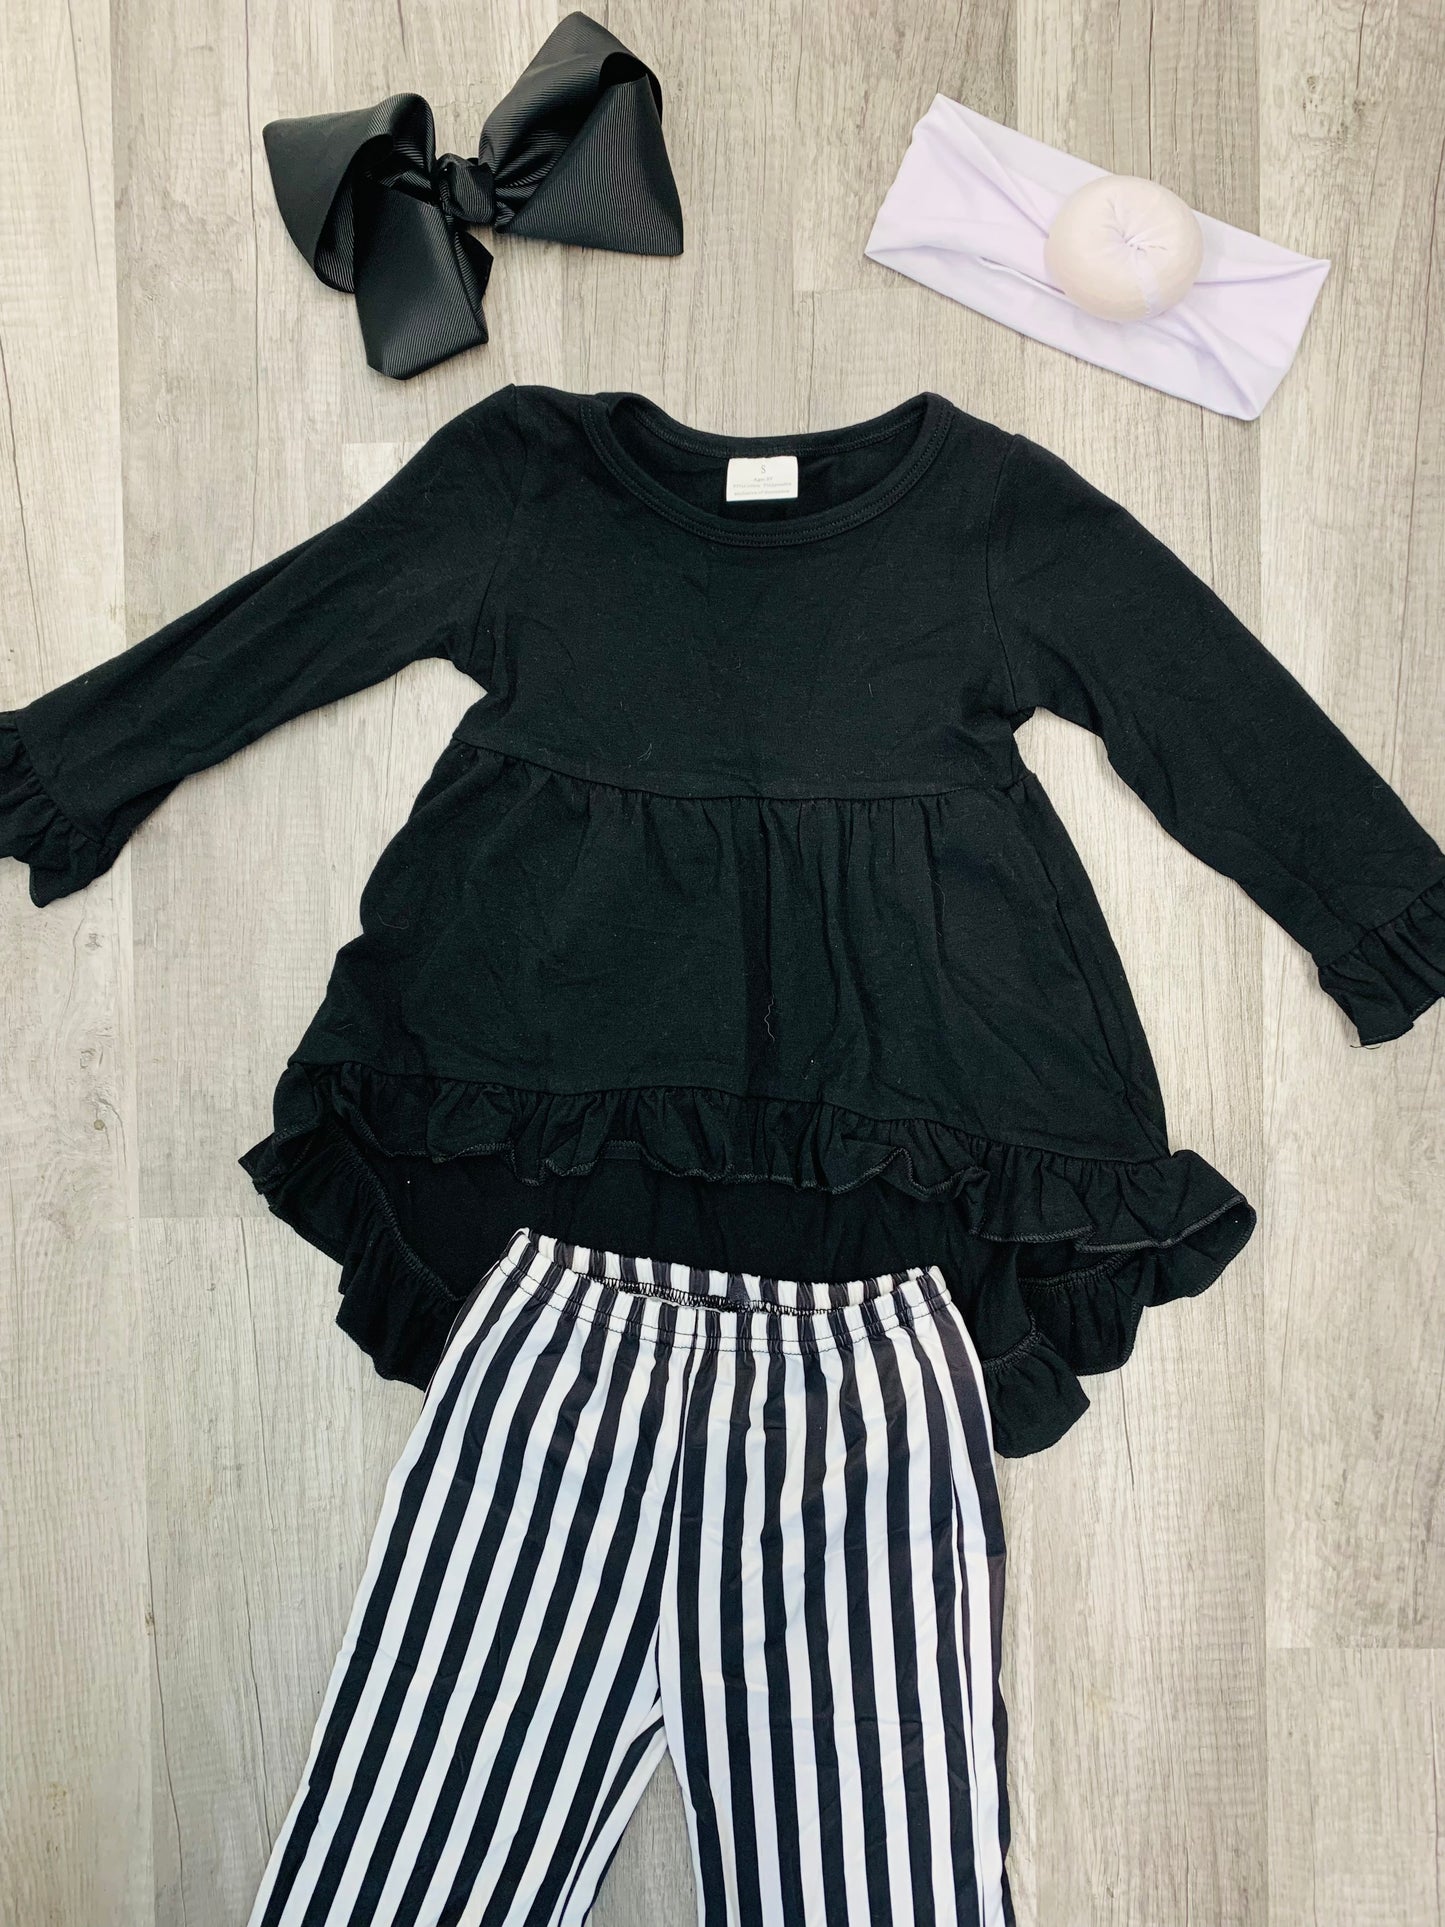 Black and White Ruffle Outfit